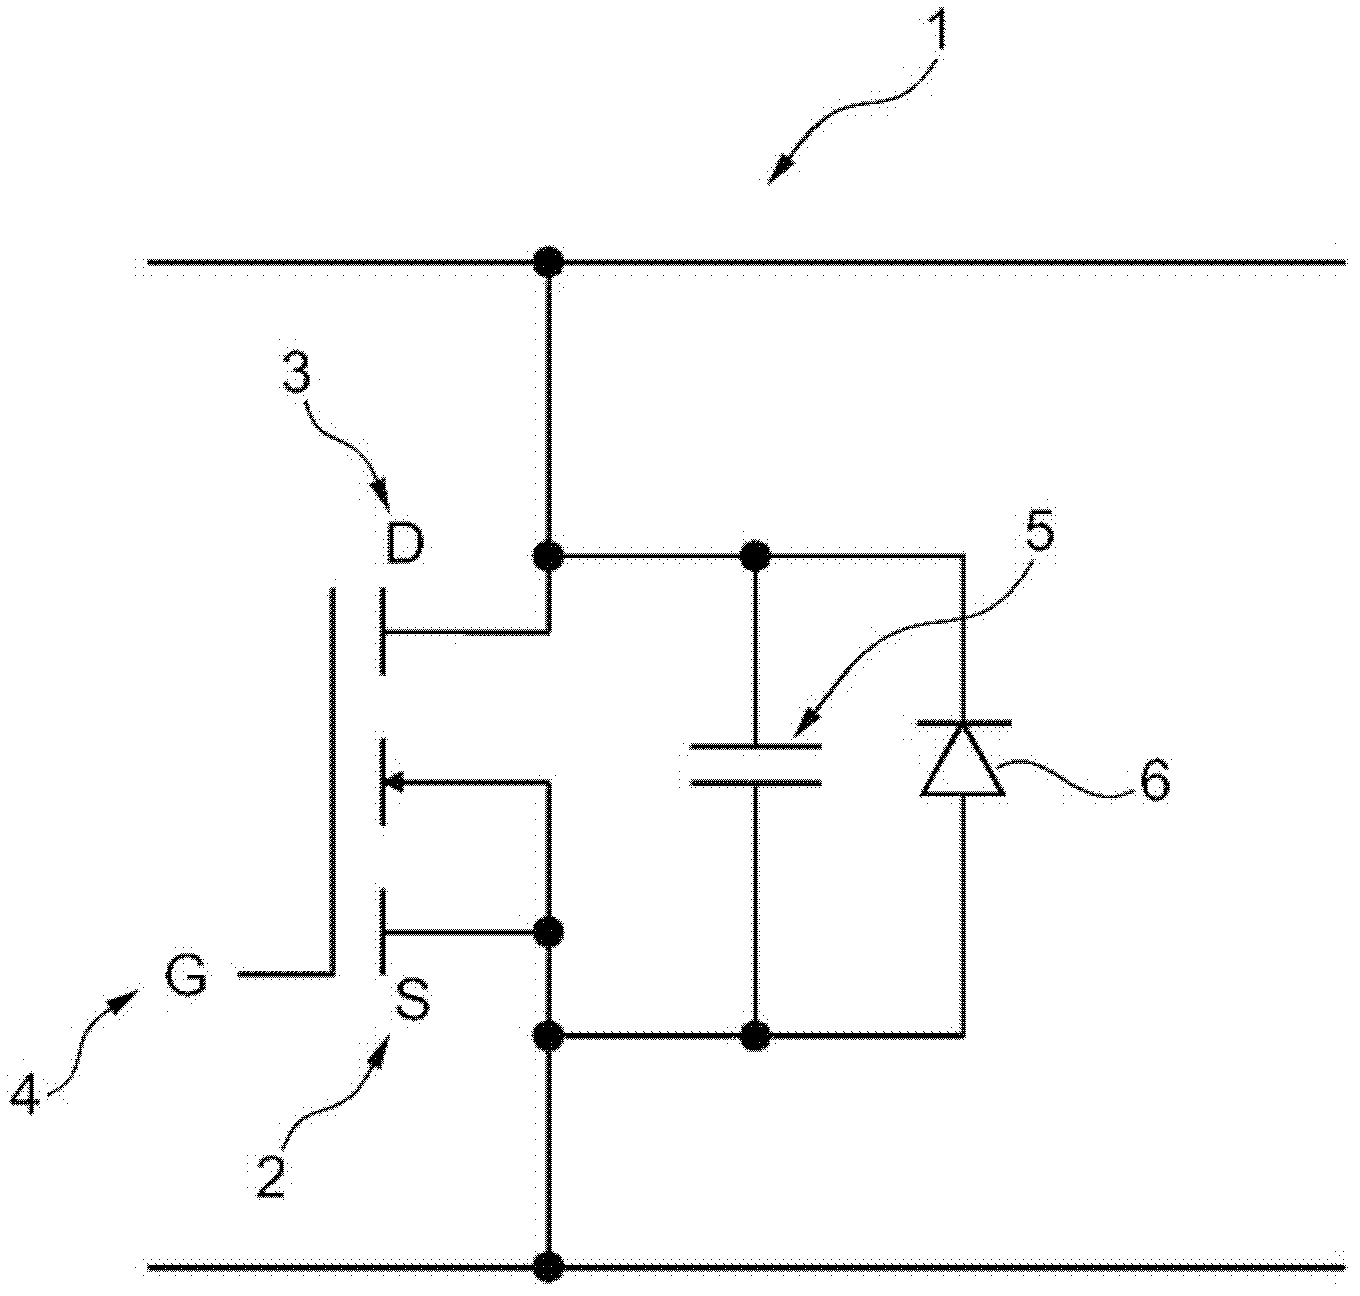 Switching Device For An X-Ray Generator